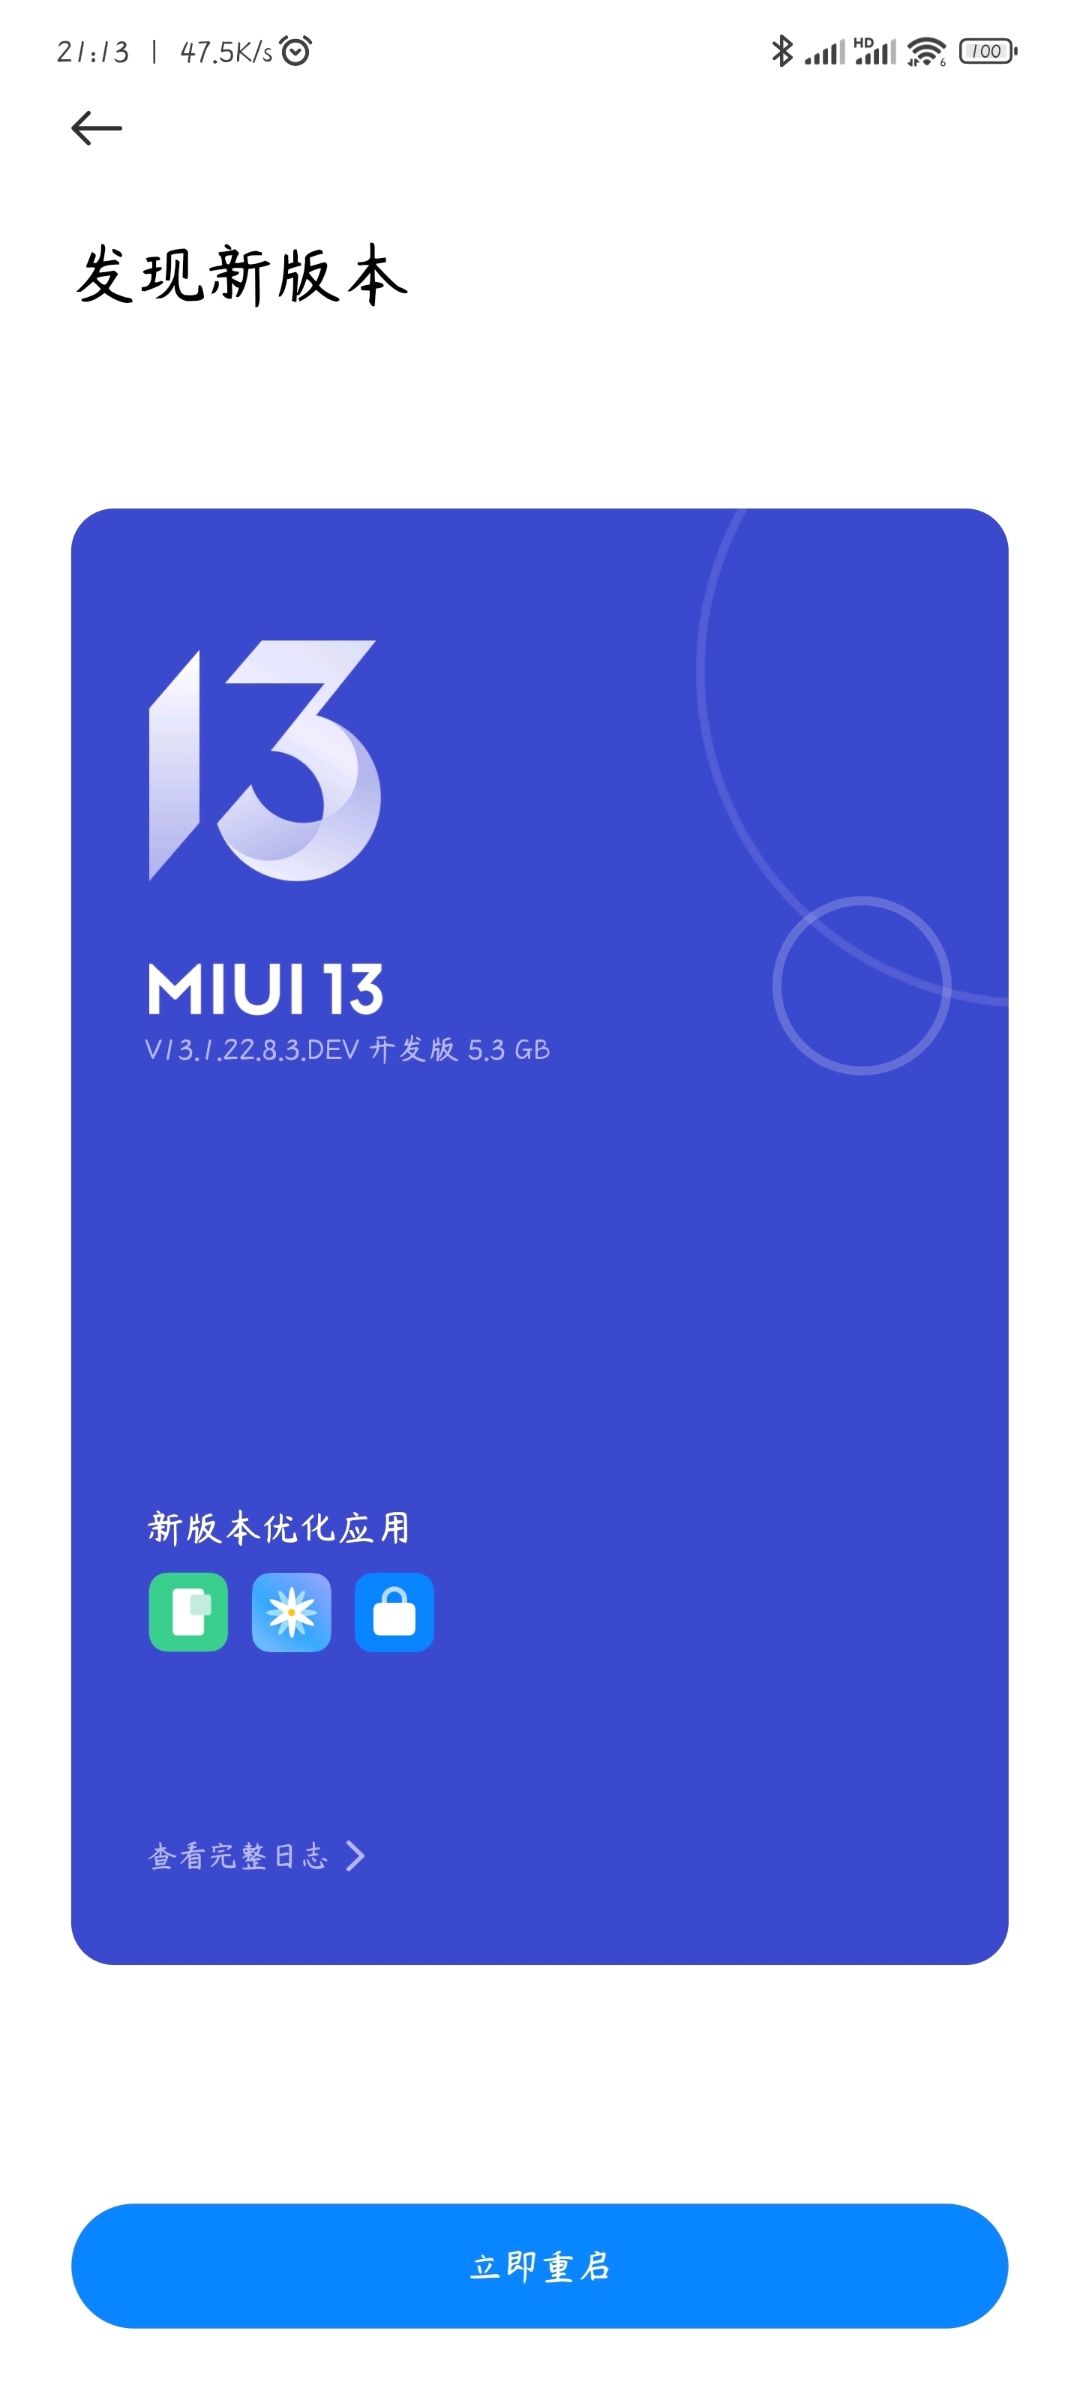 New Android 13-based MIUI 